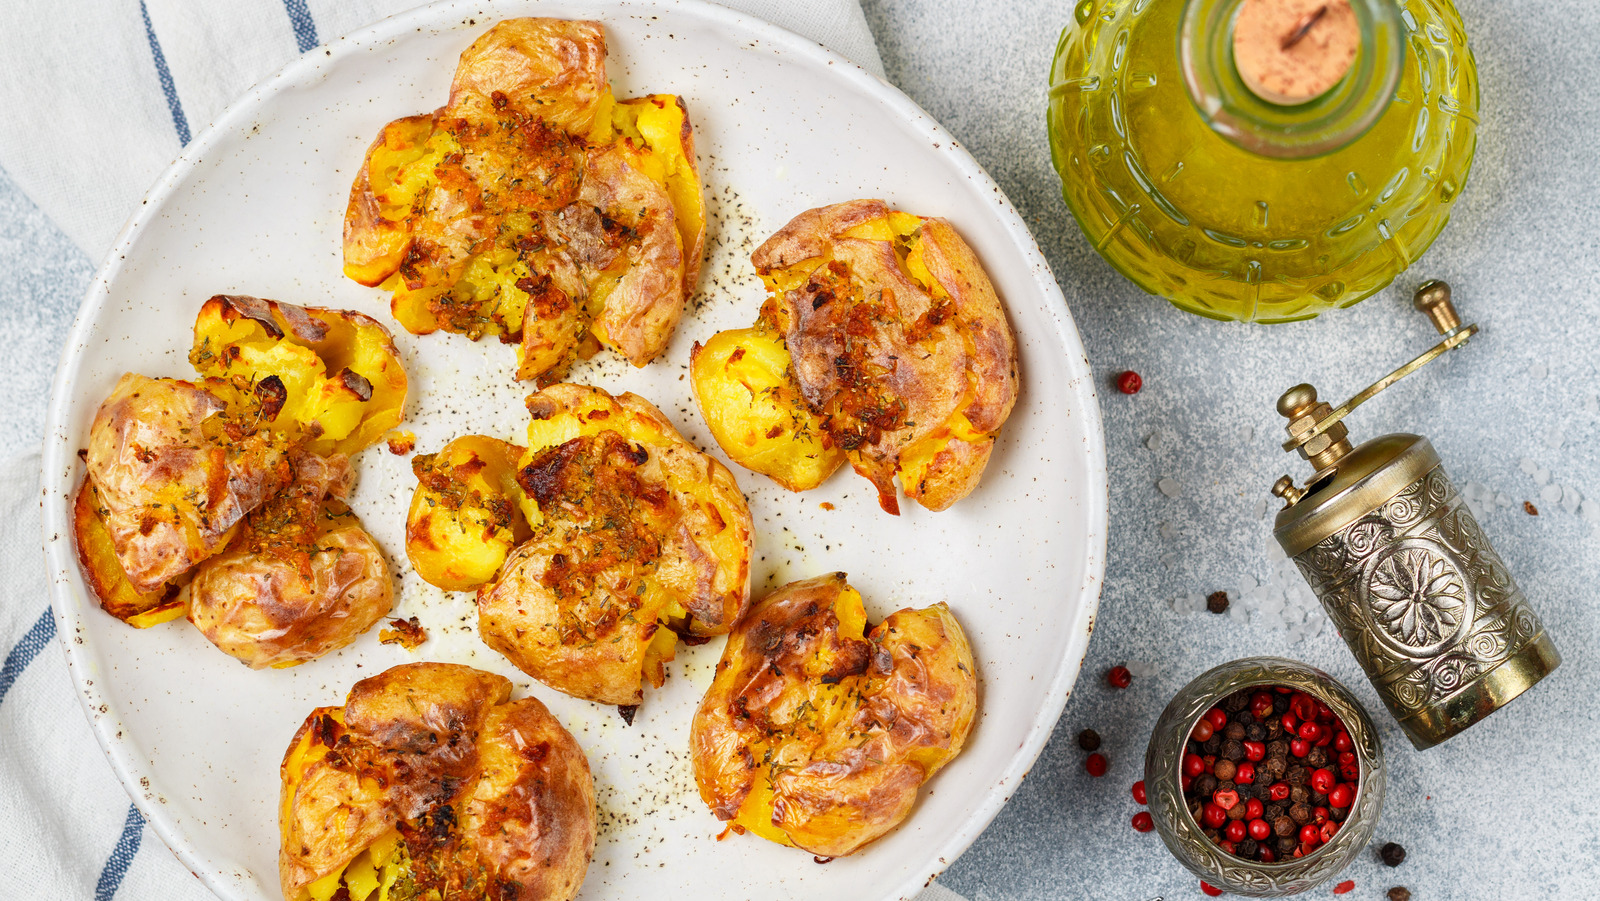 Hot Honey Is The Finishing Touch Your Smashed Potatoes Need